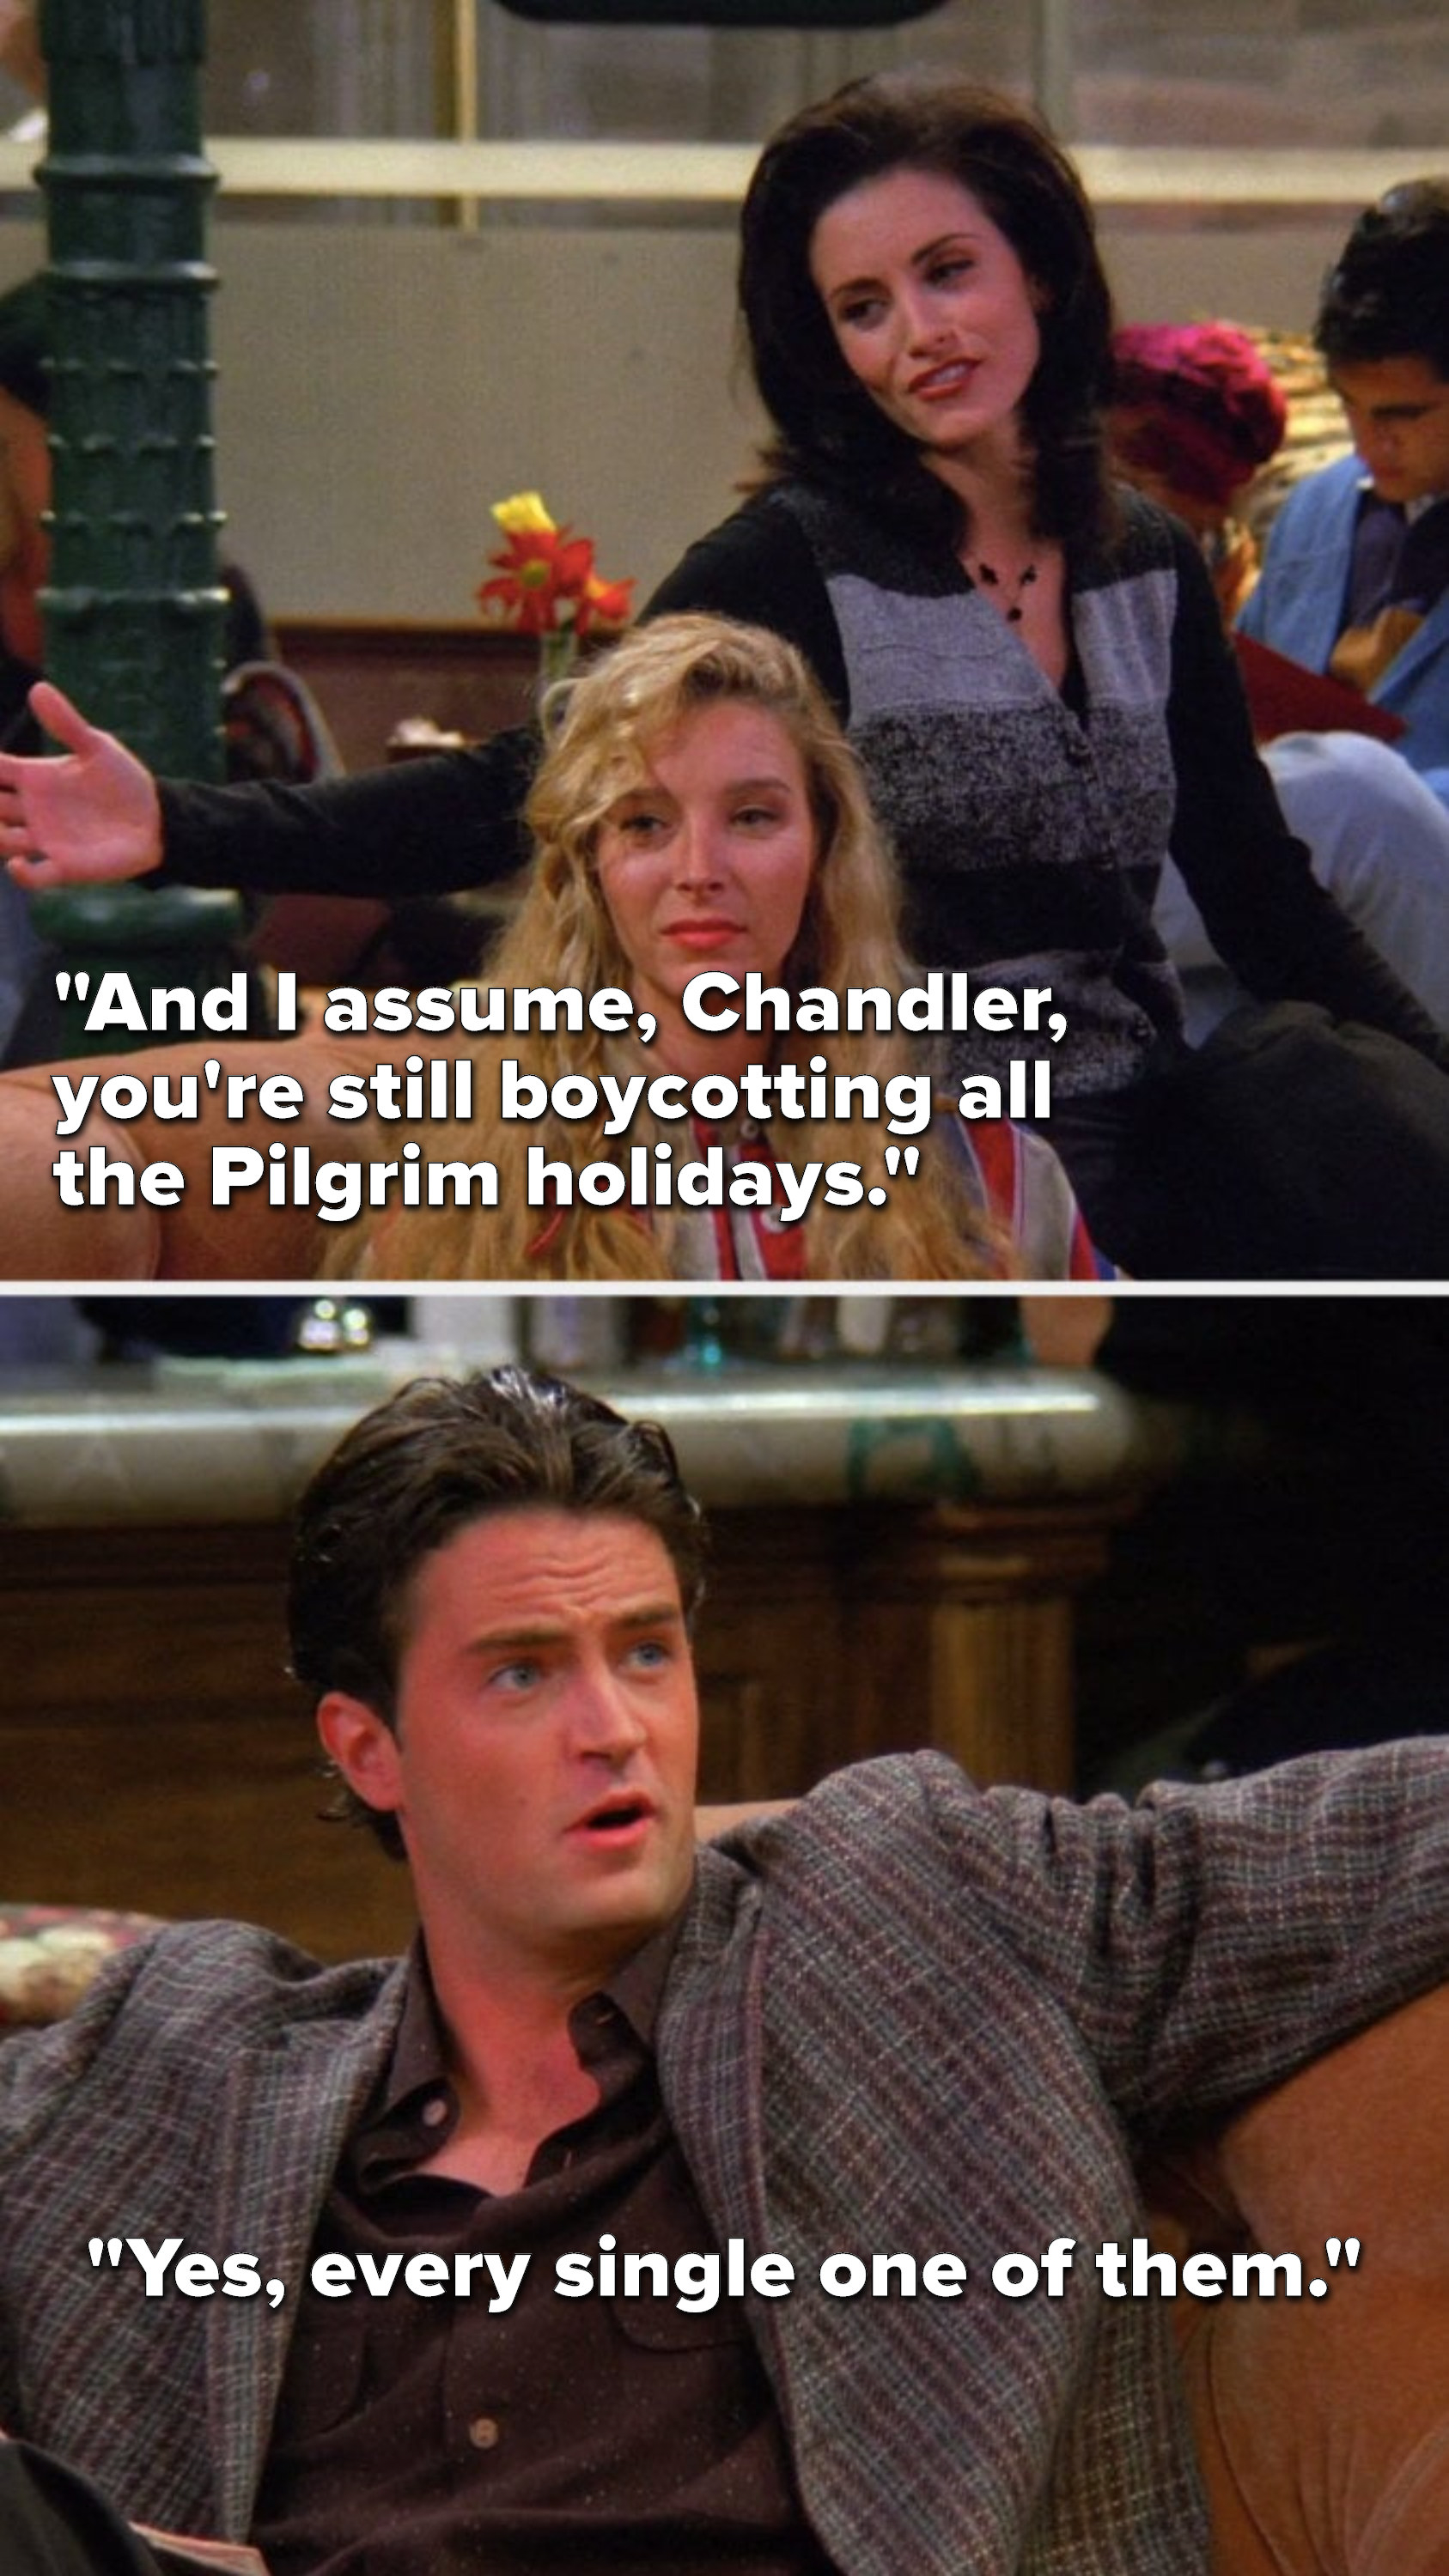 Monica says, &quot;And I assume, Chandler, you&#x27;re still boycotting all the Pilgrim holidays,&quot; and Chandler says, &quot;Yes, every single one of them.&quot;